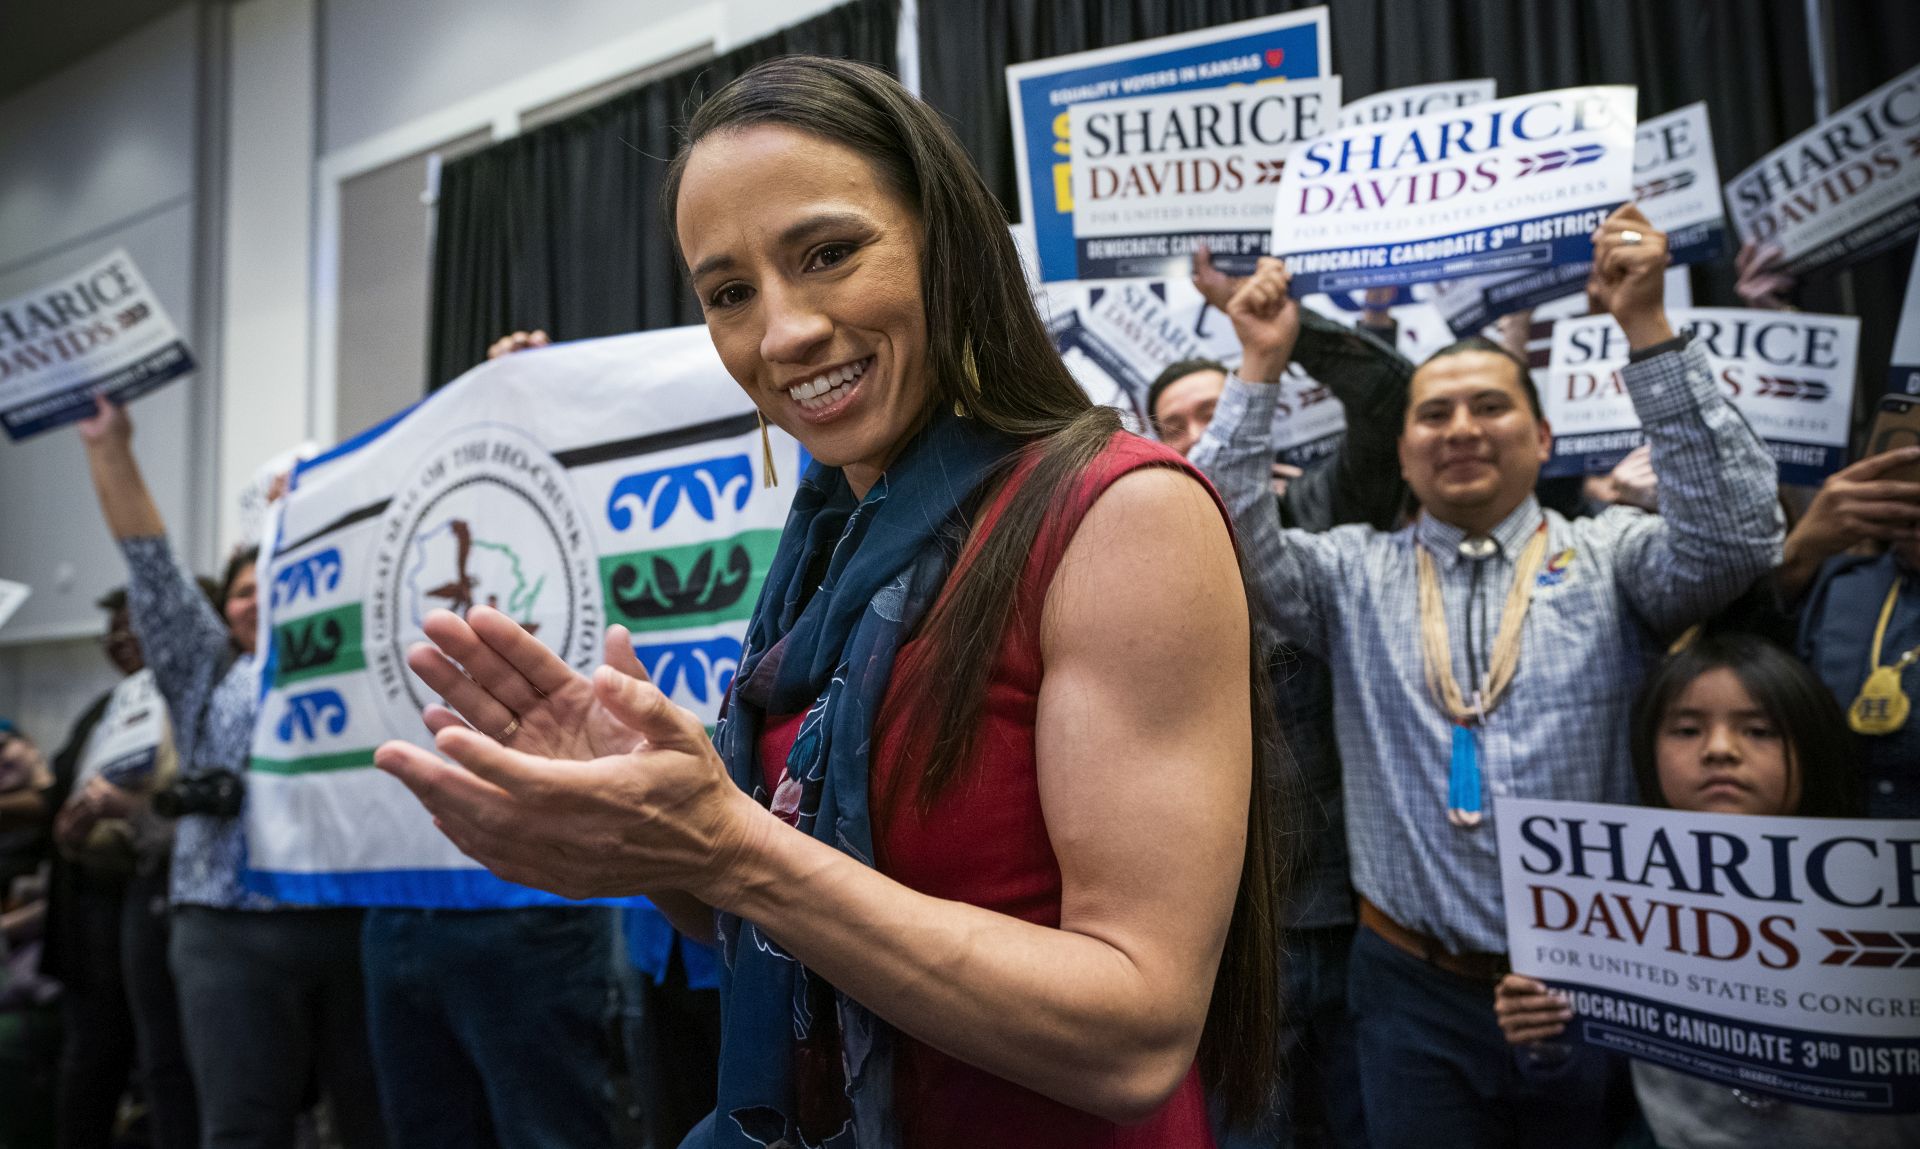 epa07147358 Democratic House candidate from Kansas Sharice Davids celebrates after winning her race at her election night watch party at the Embassy Suites Hotel in Olathe, Kansas, USA, 06 November 2018. Davids is the first lesbian Native American Congresswoman by beating Republican incumbent Kevin Yoder. Davids is one of several first-time female candidates that helped the Democratic Party takeover in the House of Representatives.  EPA/JIM LO SCALZO